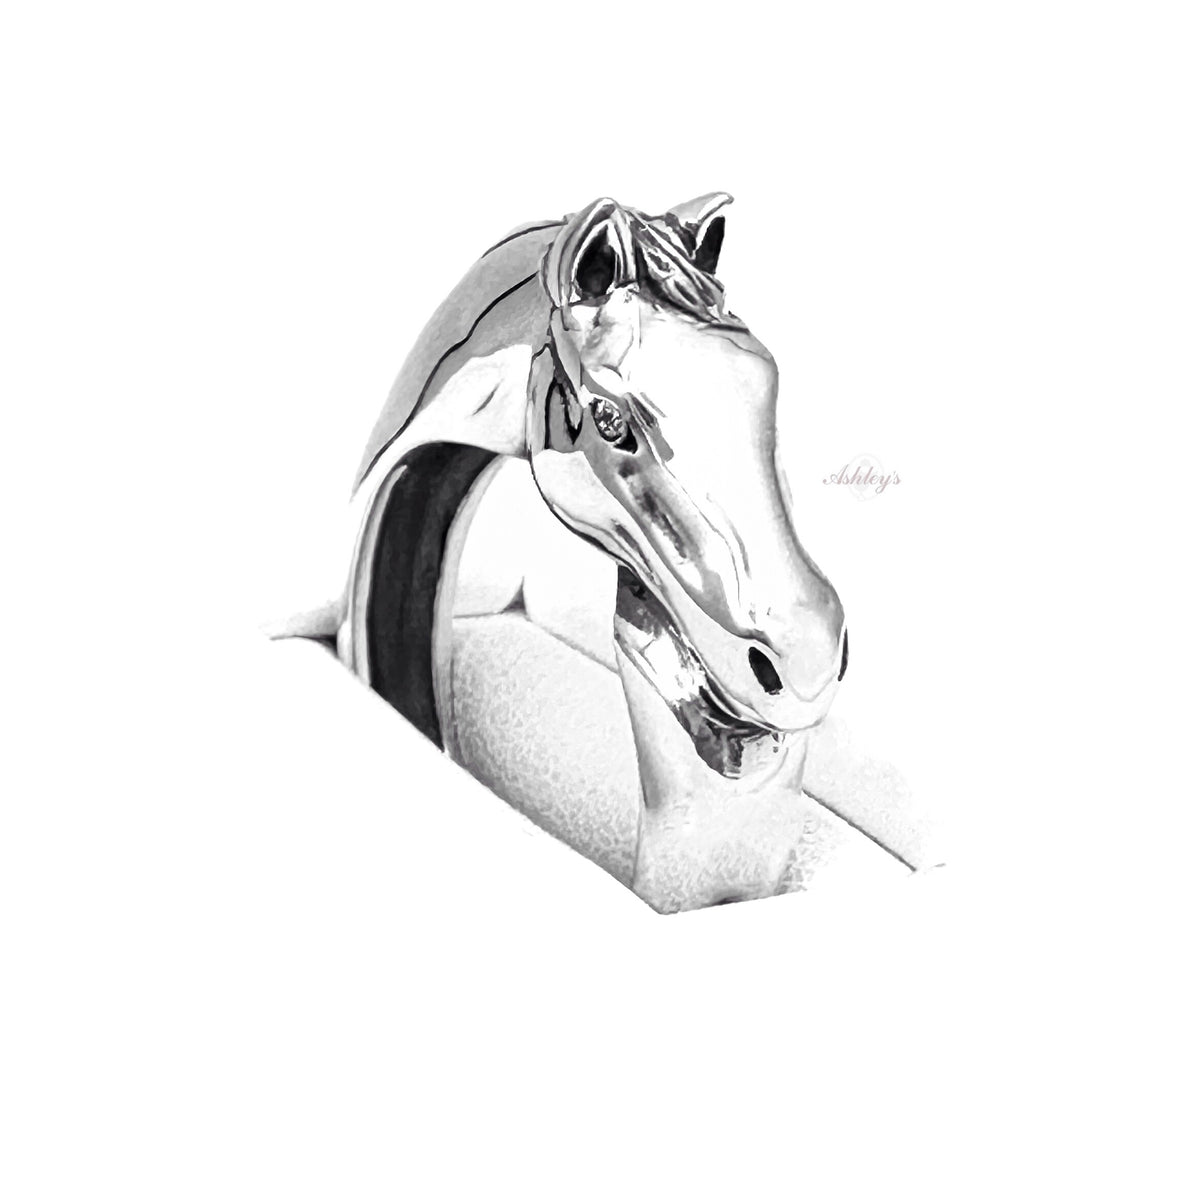 Ashley's Horse Head Ring, Sterling Silver